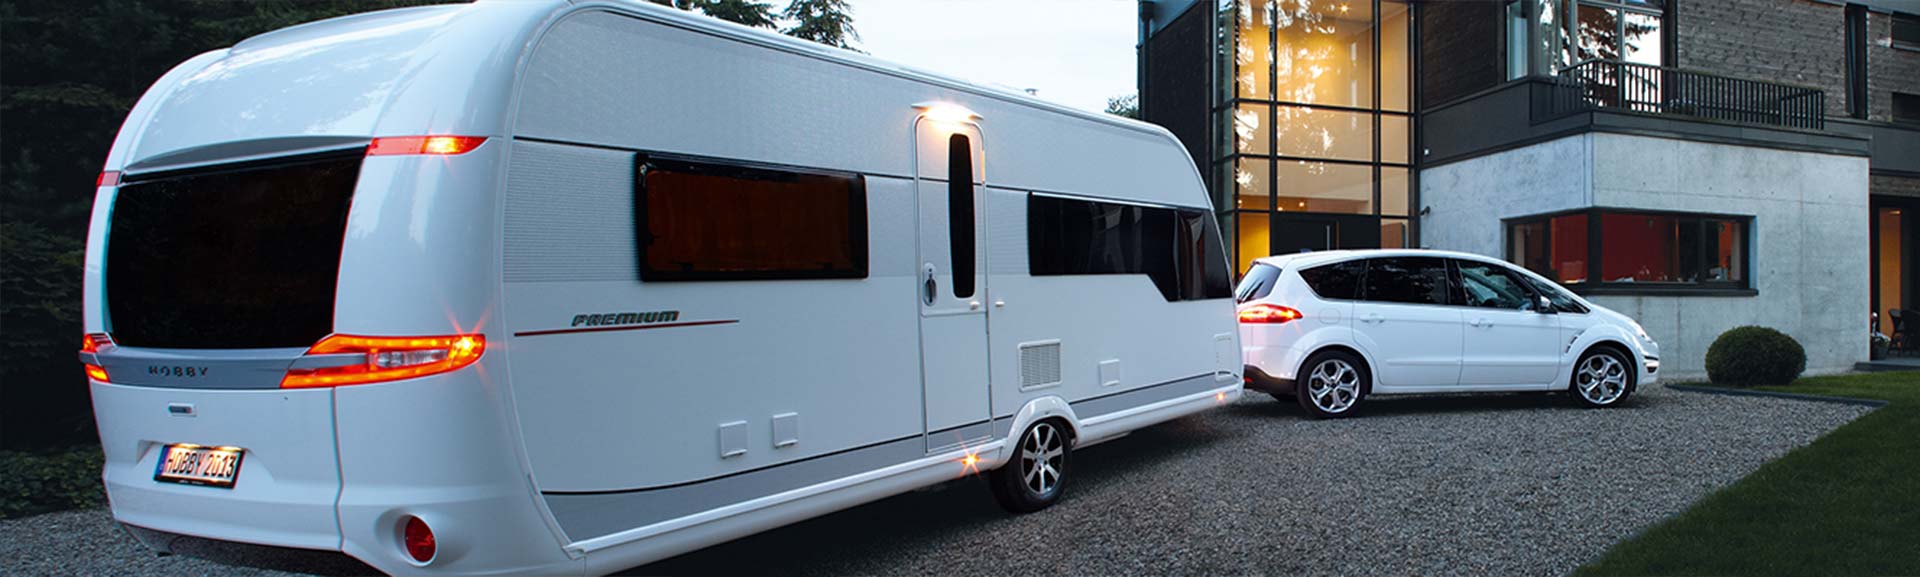 Providing top quality caravans, motorhomes and accessories to customers across the UK